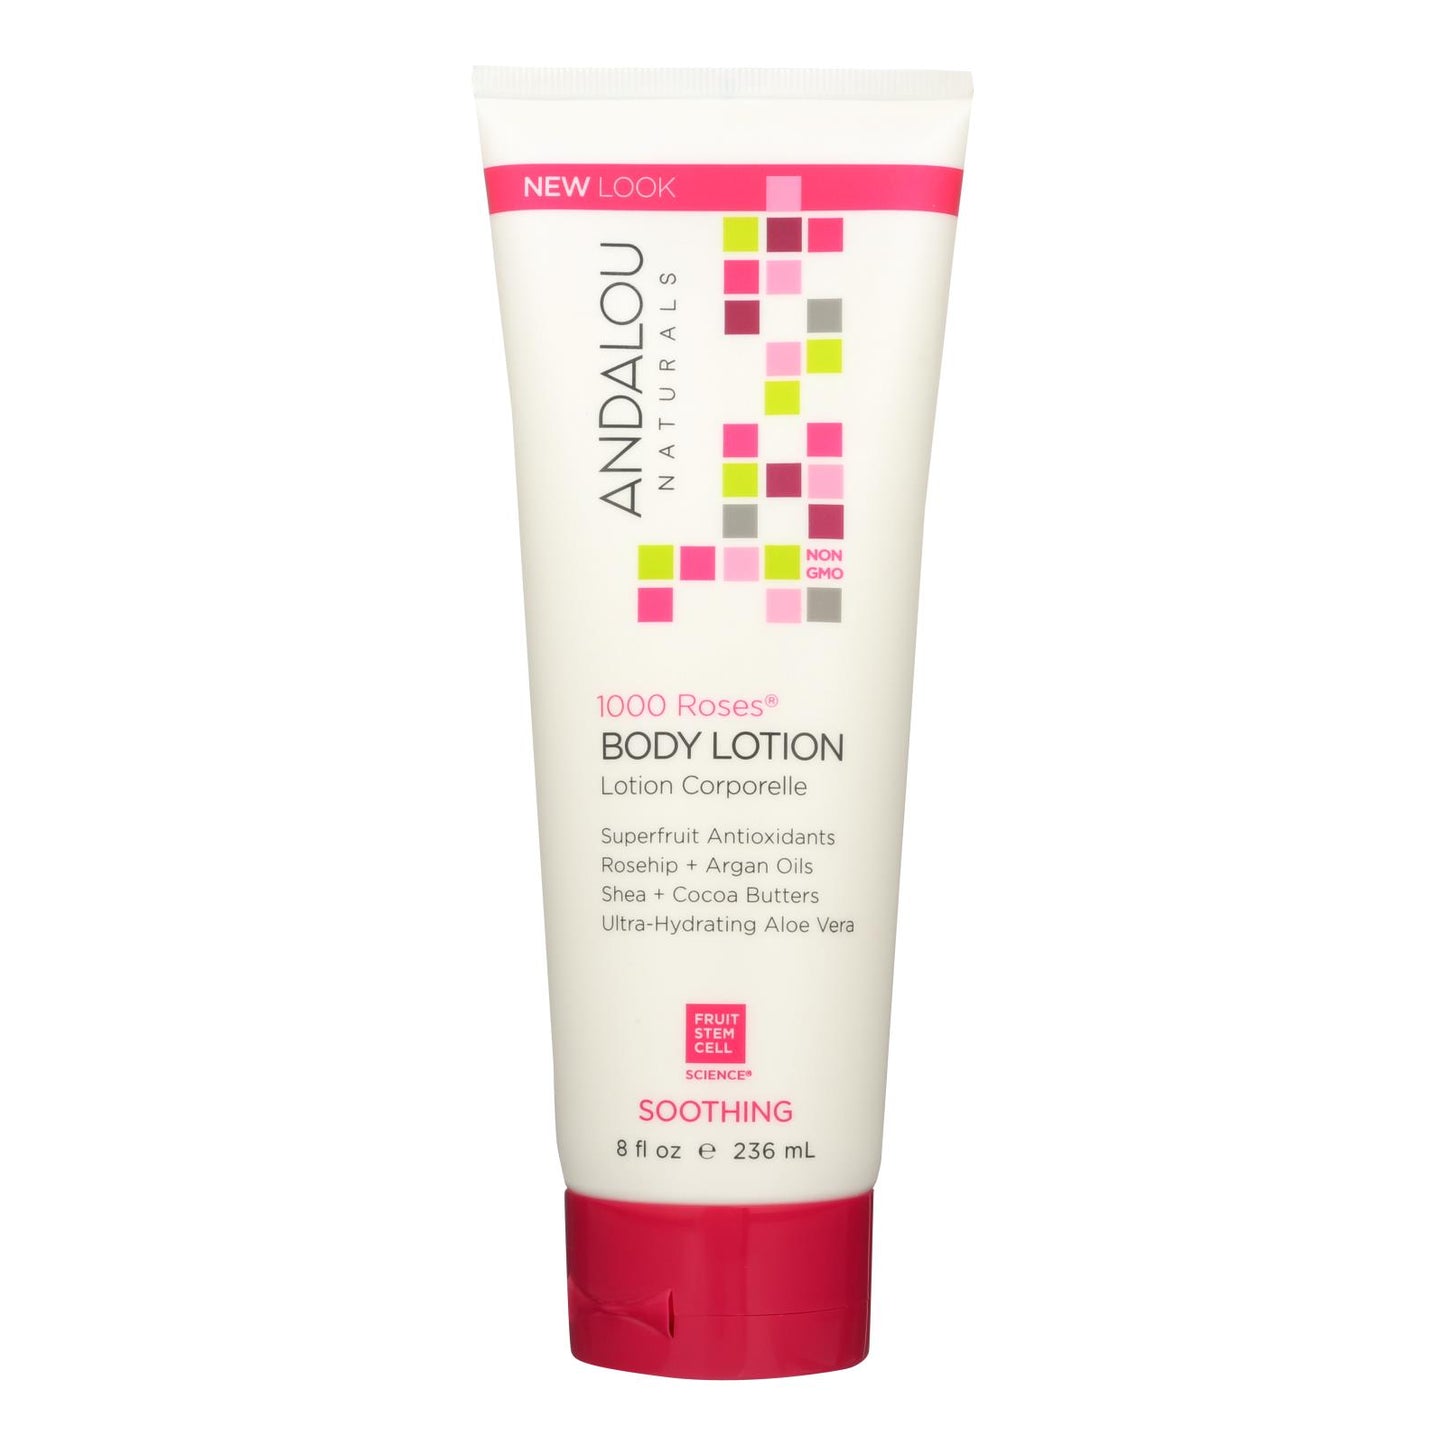 
                  
                    Andalou Naturals Body Lotion 1000 Roses Soothing - 8 oz.
                  
                